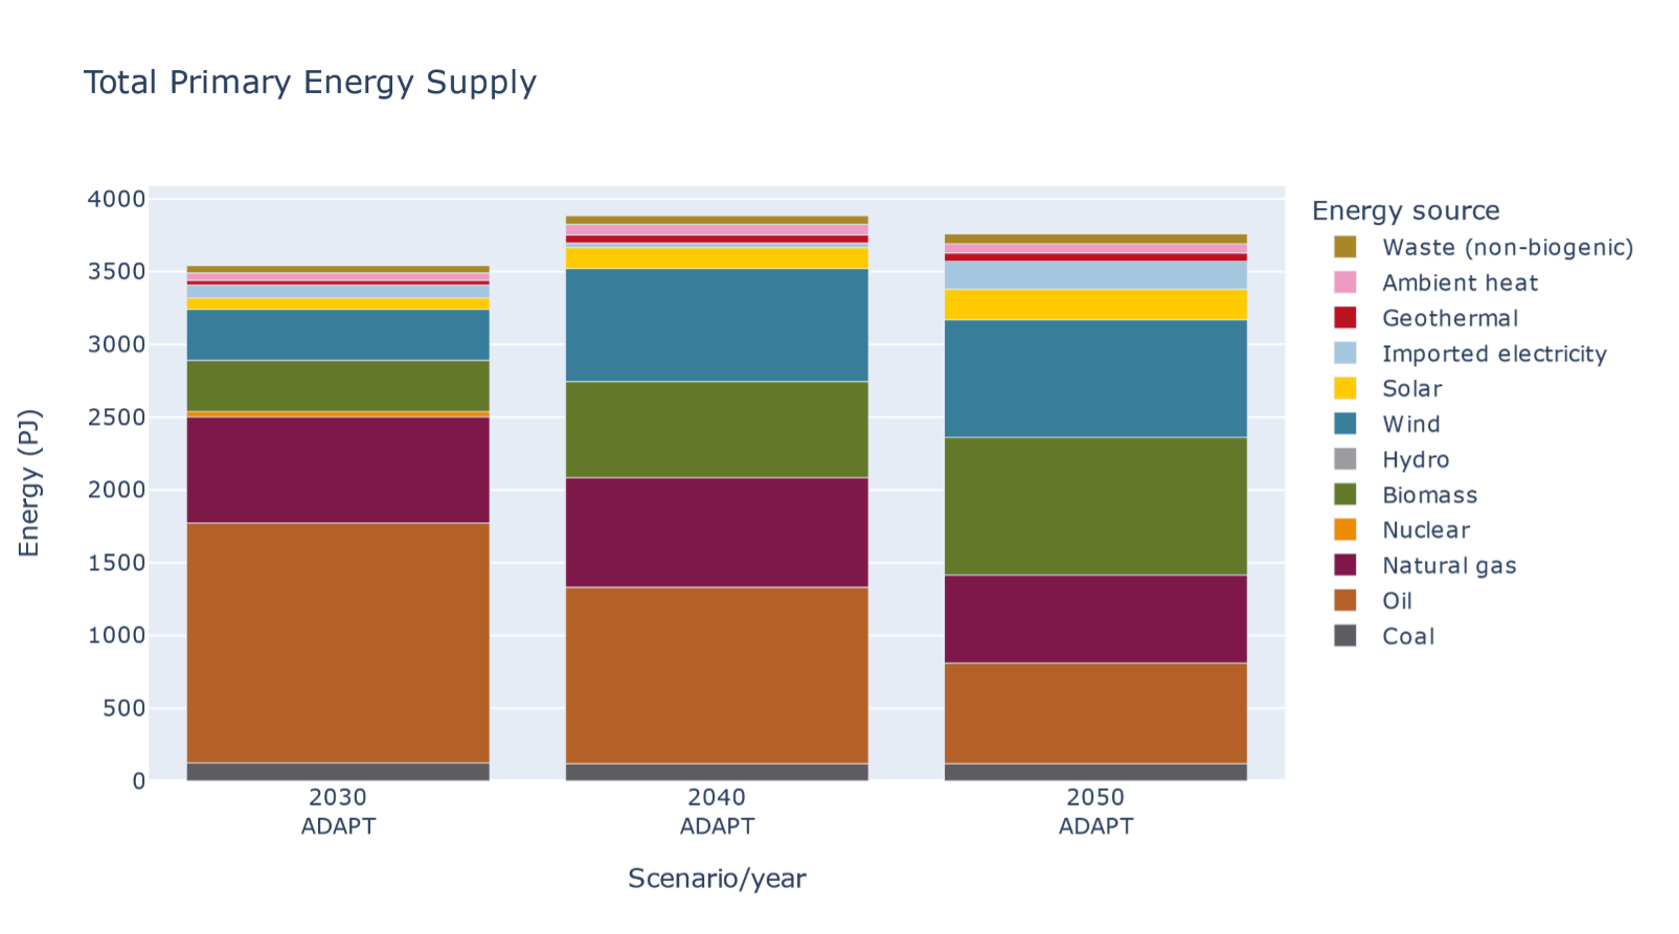 Figure 1 Example Opera output, showing the primary energy supply by energy source in the ADAPT scenario for 2030, 2040, 2050